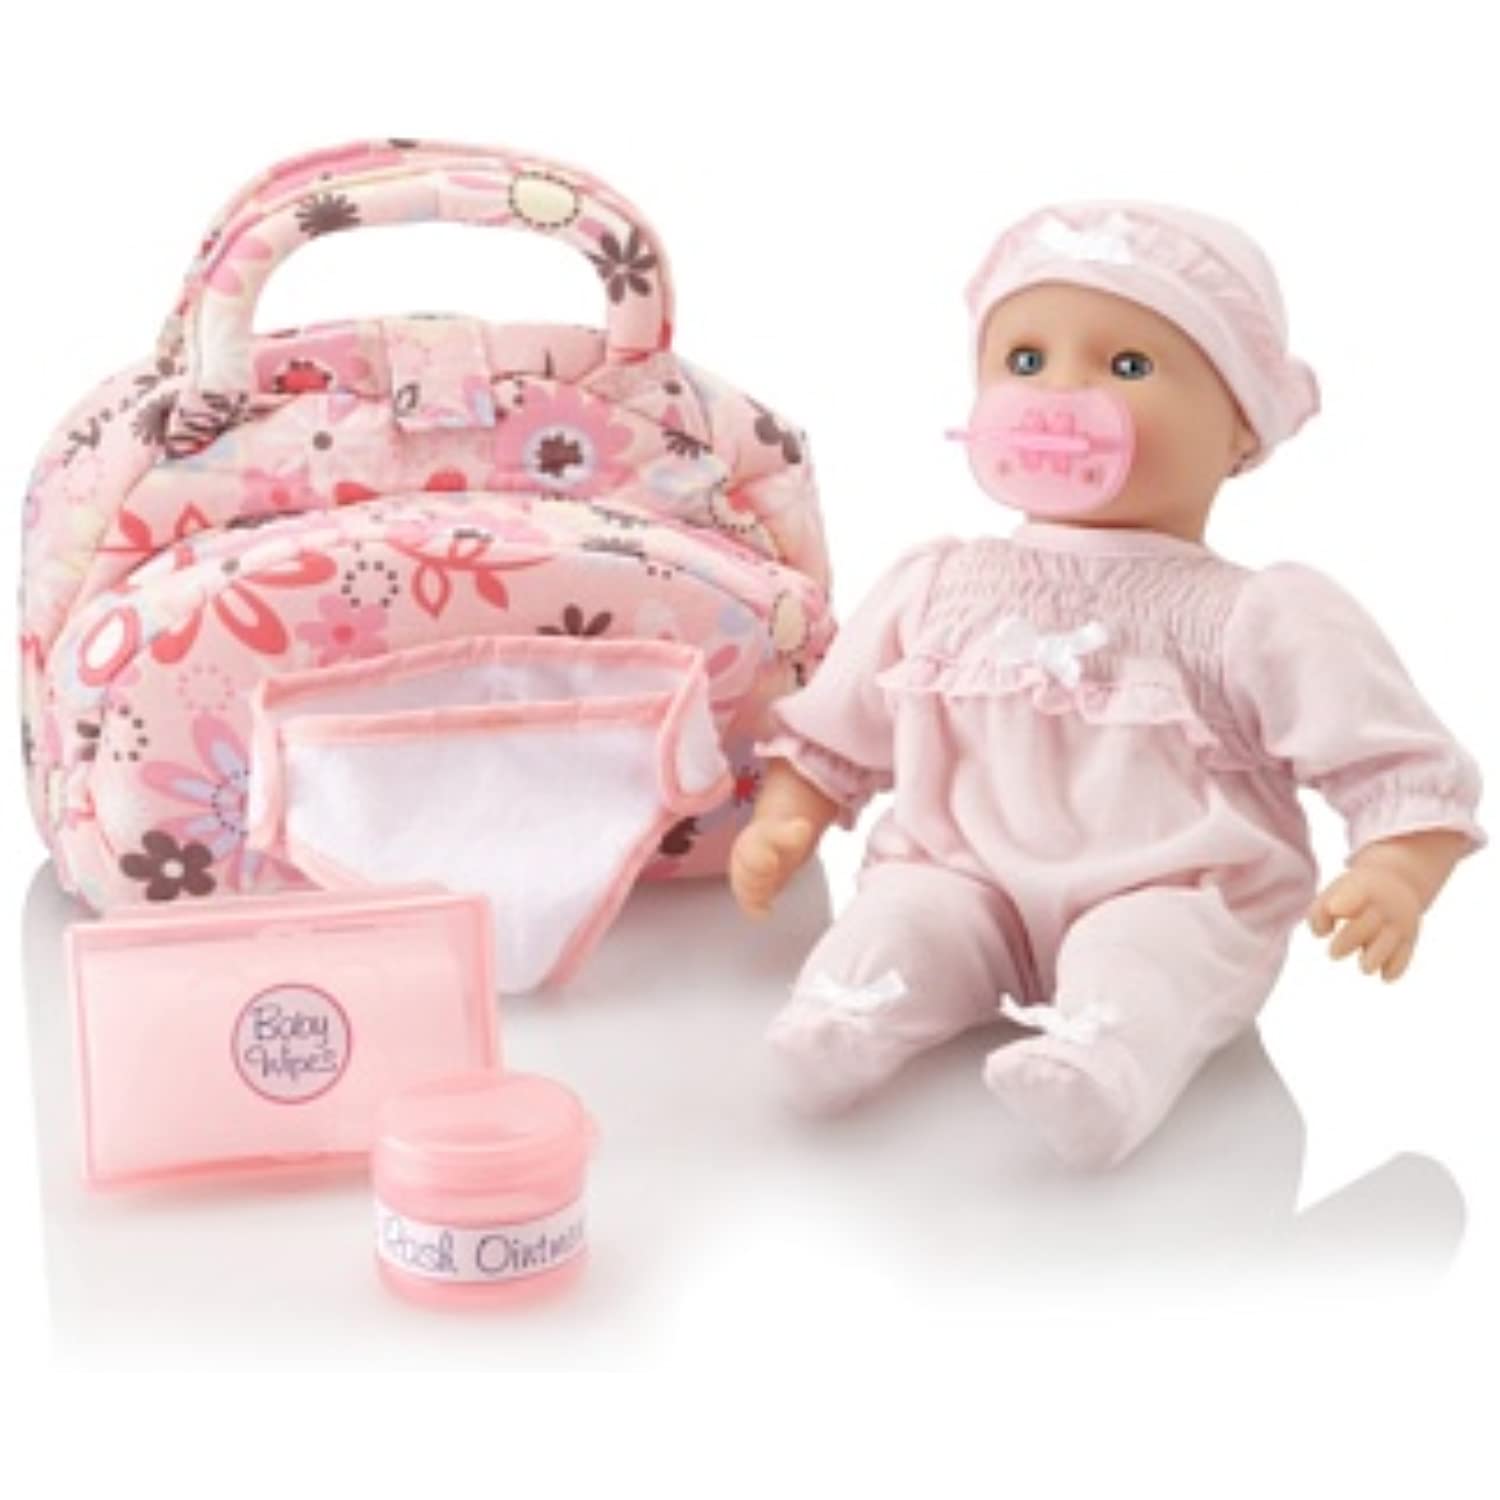 Melissa & Doug Bundle Includes 2 Items Mine to Love Jenna 12-Inch Soft Body Baby Doll with Romper and Hat Mine to Love Doll Diaper Changing Set with Bag, Wipes, Accessorie